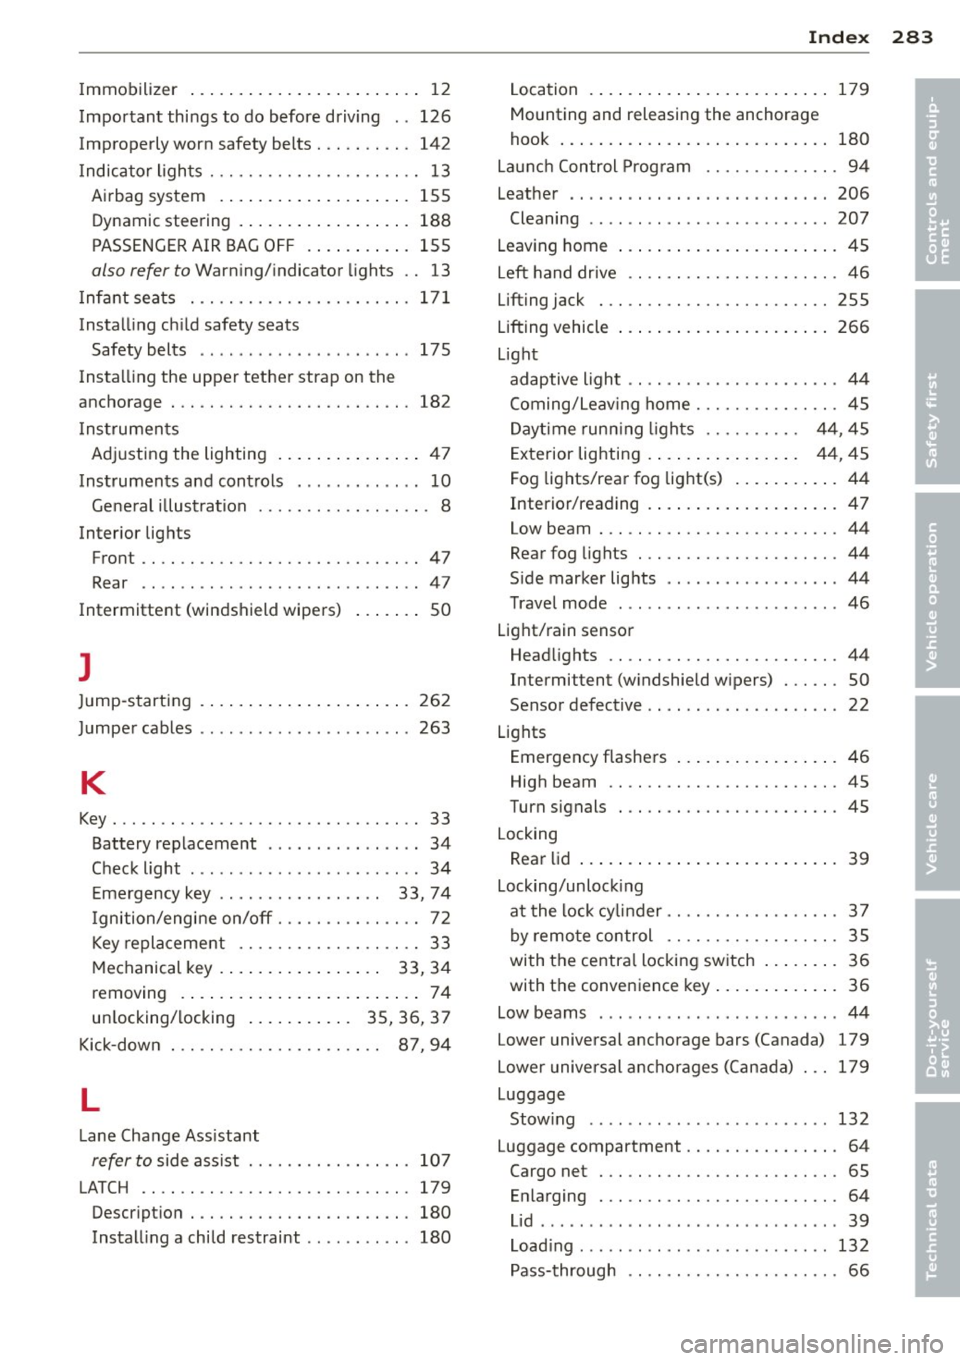 AUDI A4 SEDAN 2013  Owners Manual Immobilizer  ... .... .... ... .. .. .. ....  12 
Impor tant  things  to  do before  driving  .. 126 
Improperly  worn  safety  belts  . .. .. .. .. .  142 
I ndica tor  ligh ts  ............ .... .. 